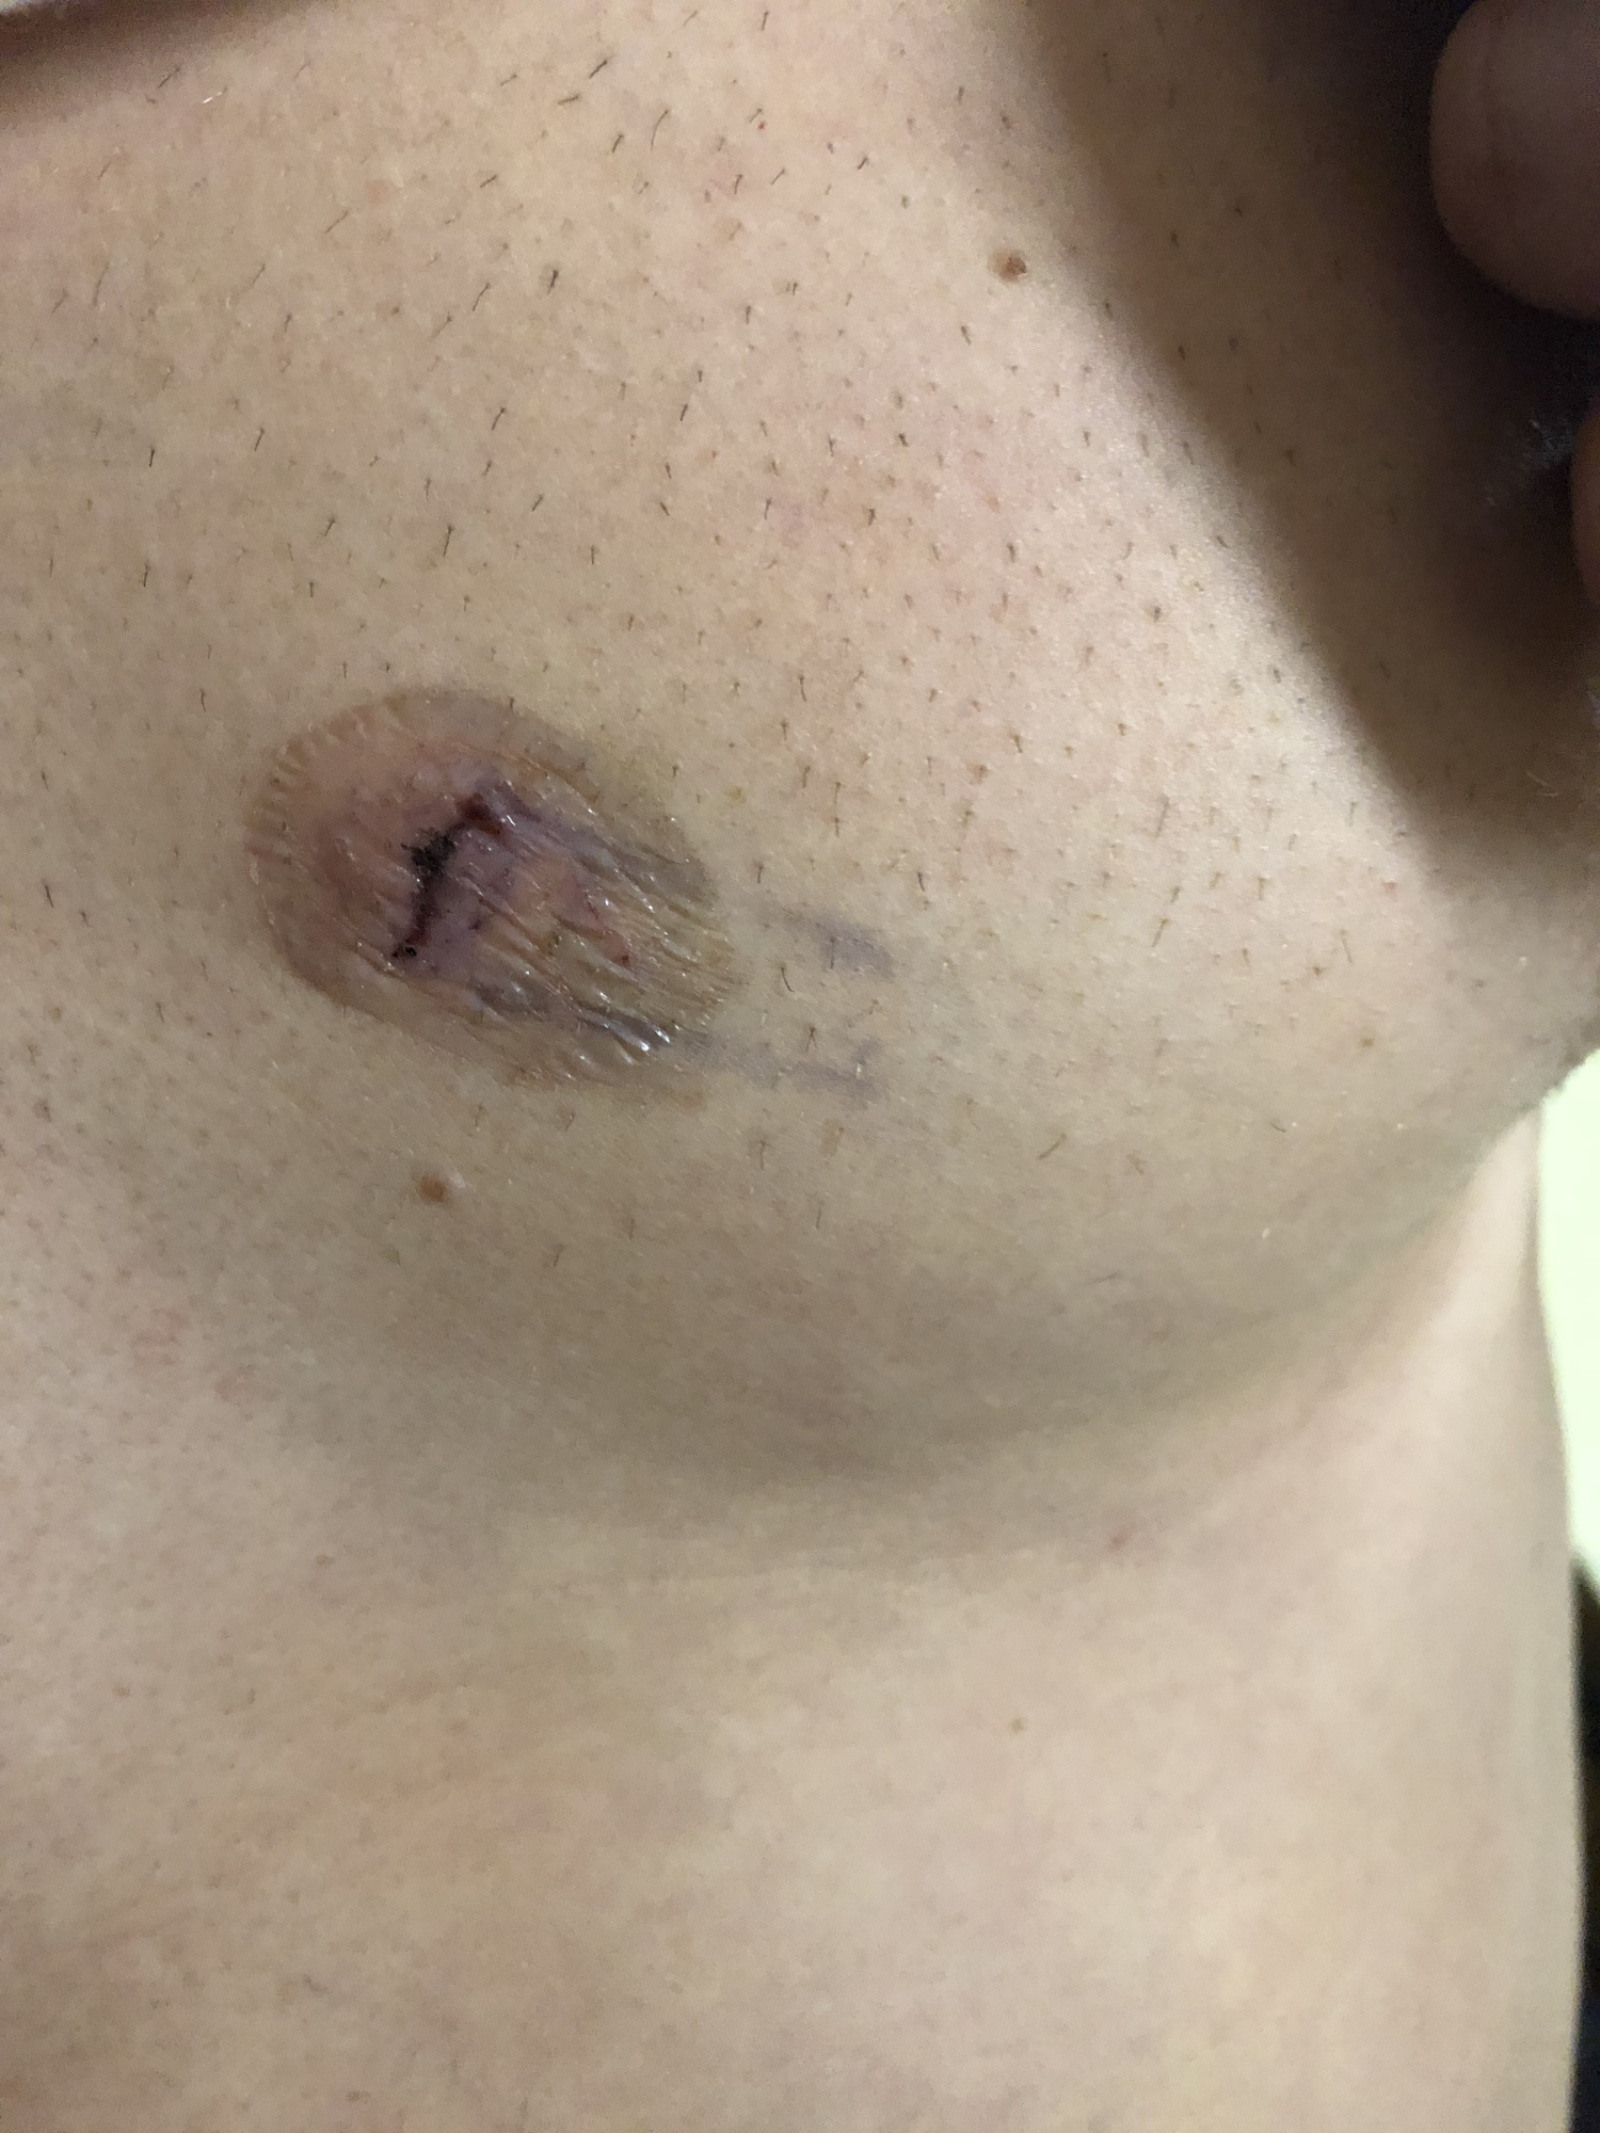 Incision site for the Linq monitor...one day later with a little bruising.